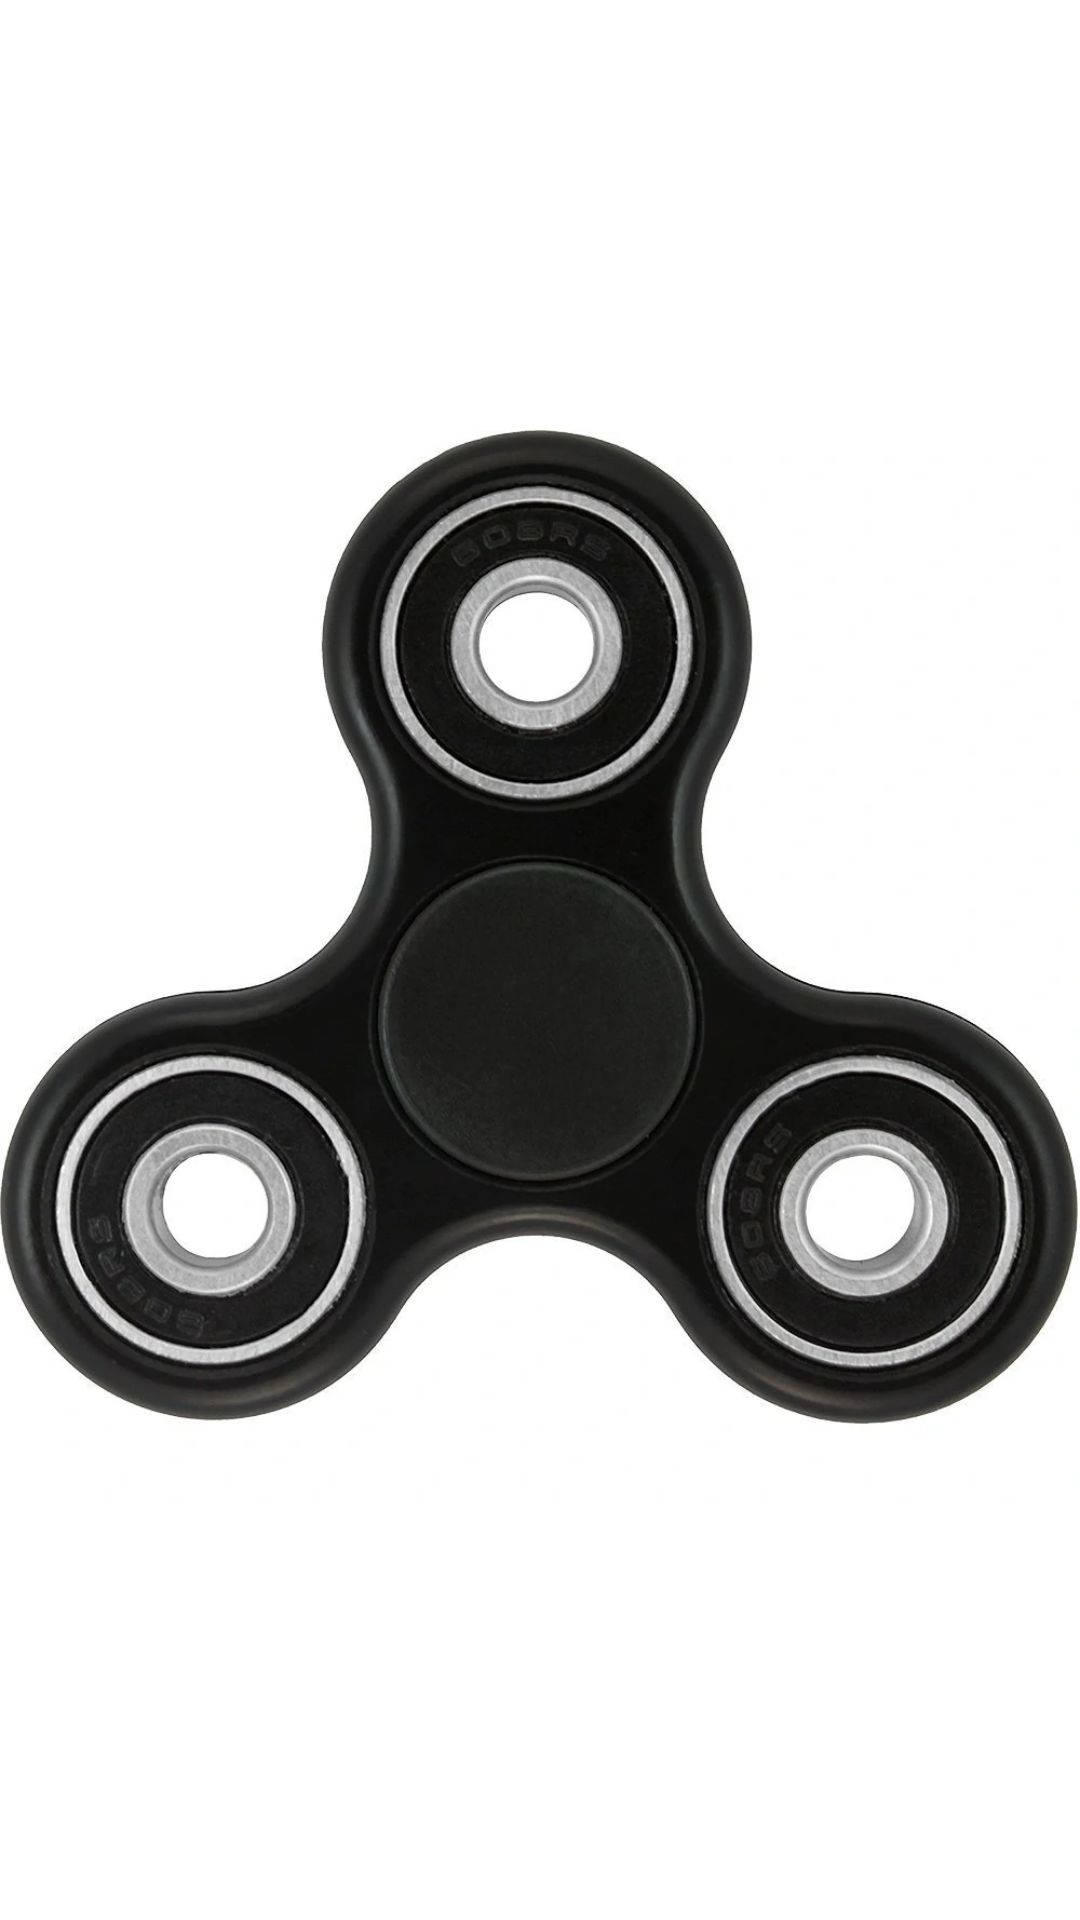 Relaxing With A Black Fidget Toy Background